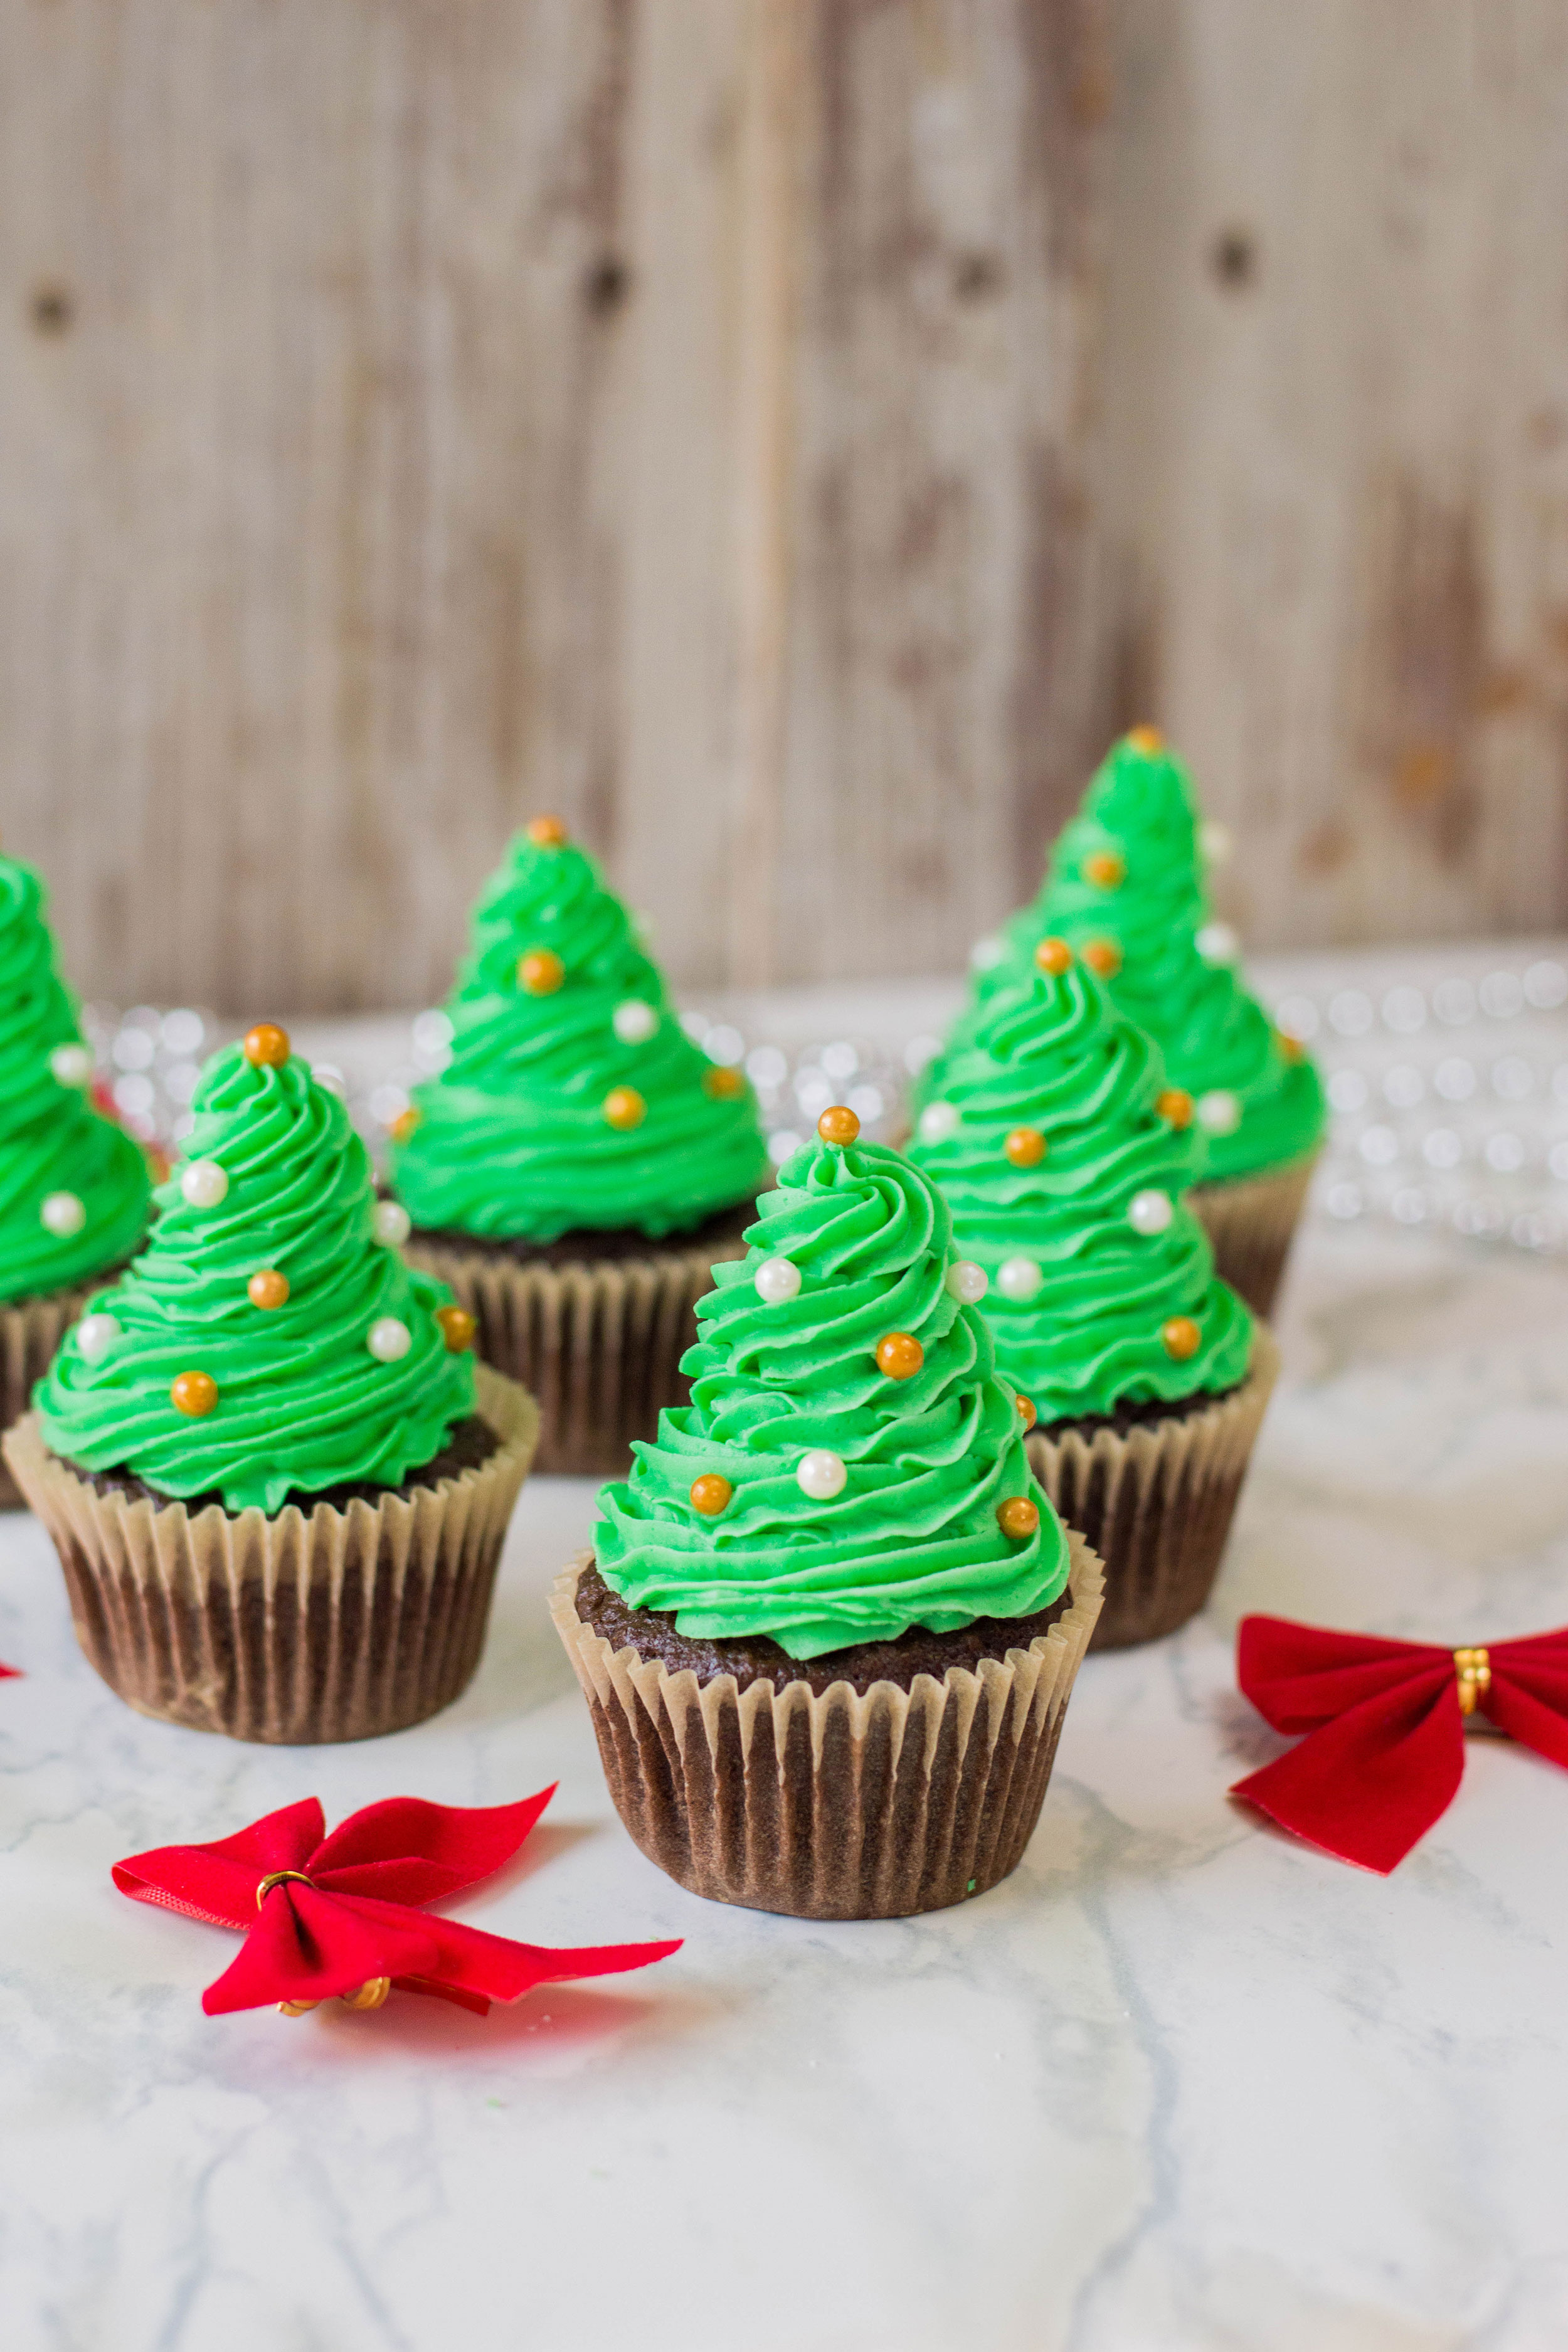 It's the time of the year to get festive with our desserts! These easy Christmas Tree Cupcakes is generously topped with homemade buttercream. Your sweet tooth will thank you later! #christmasdessert